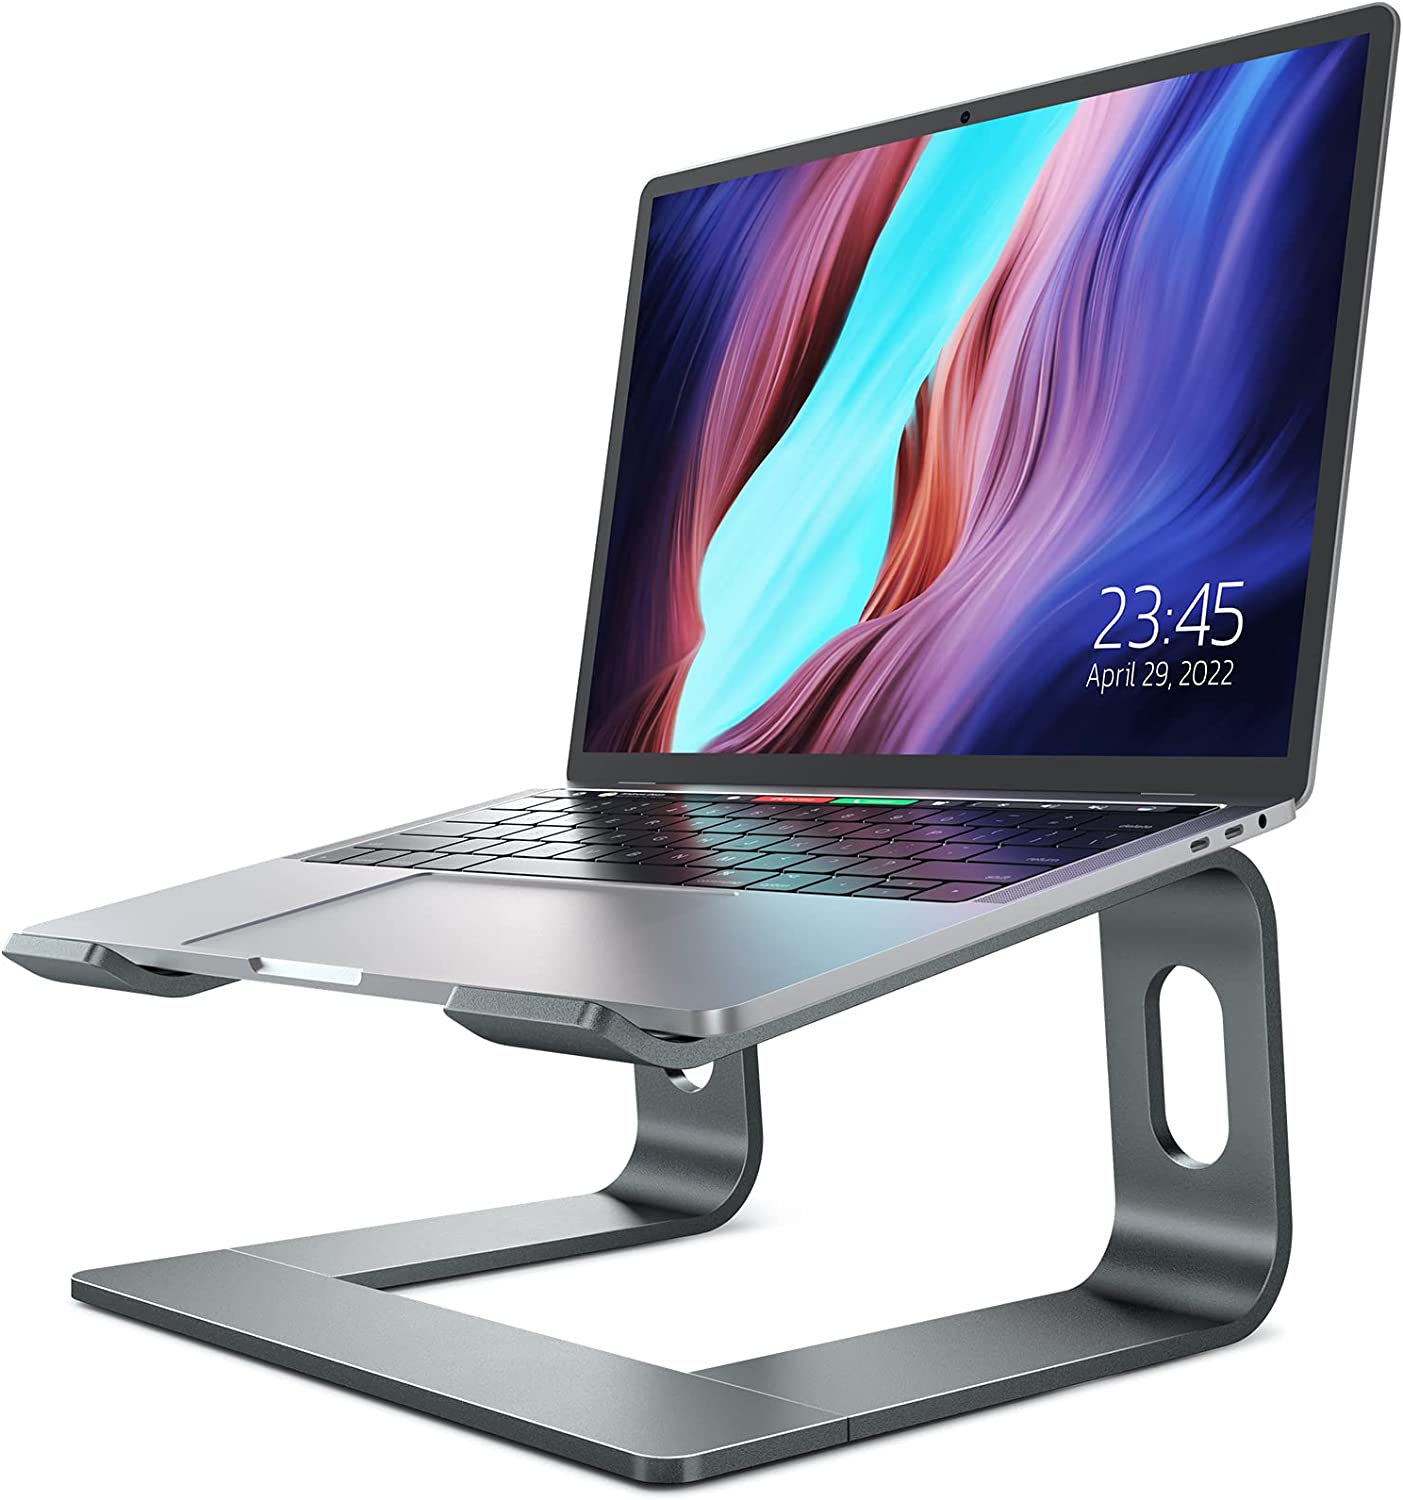 Nulaxy Laptop Stand, Ergonomic Aluminum Laptop Computer Stand, Detachable Laptop Riser Notebook Holder Stand Compatible with MacBook Air Pro, Dell XPS, HP, Lenovo More 10-15.6” Laptops- Grey - image 1 of 7